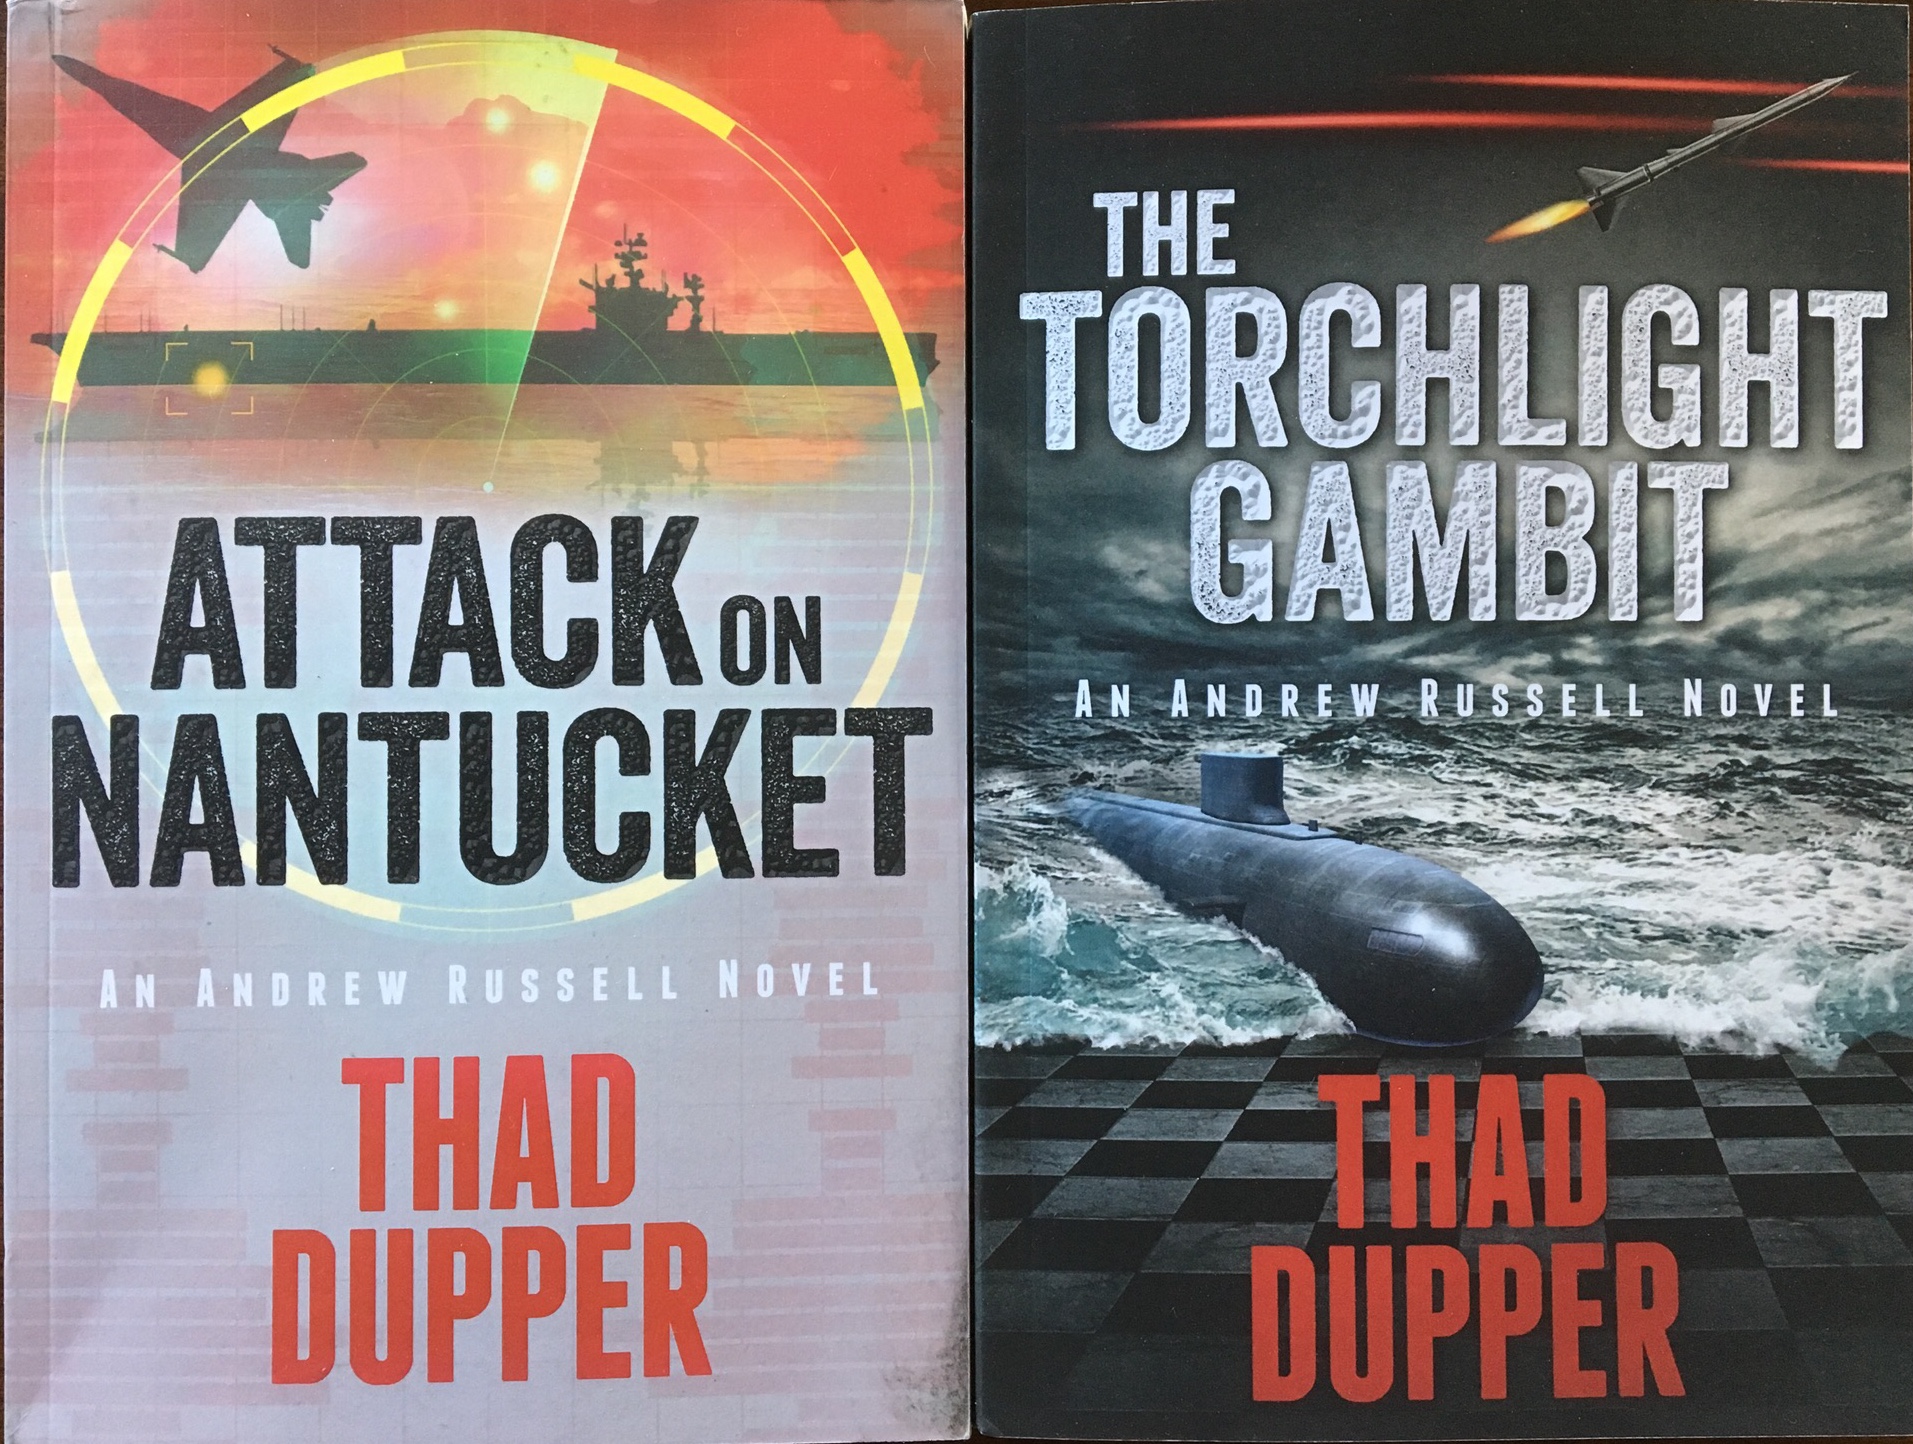 Front covers of "Attack on Nantucket" & "The Torchlight Gambit" by Thad Dupper